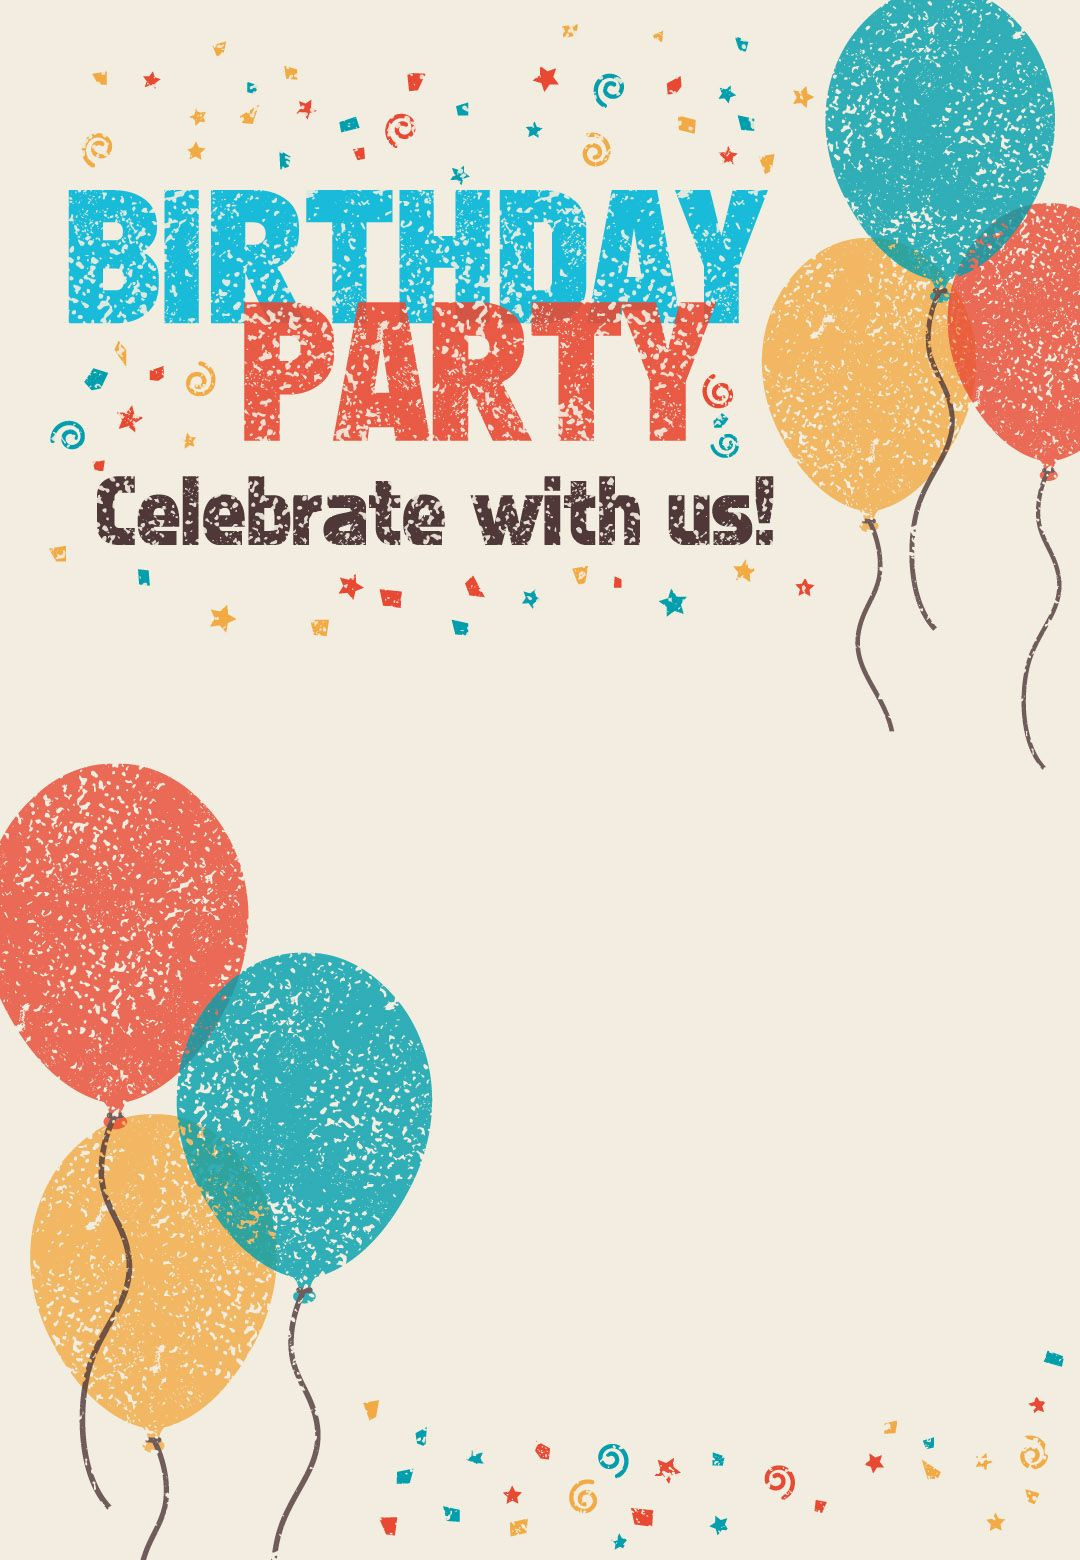 Free Online Birthday Party Invitations
 Free Printable Celebrate With Us Invitation Great site